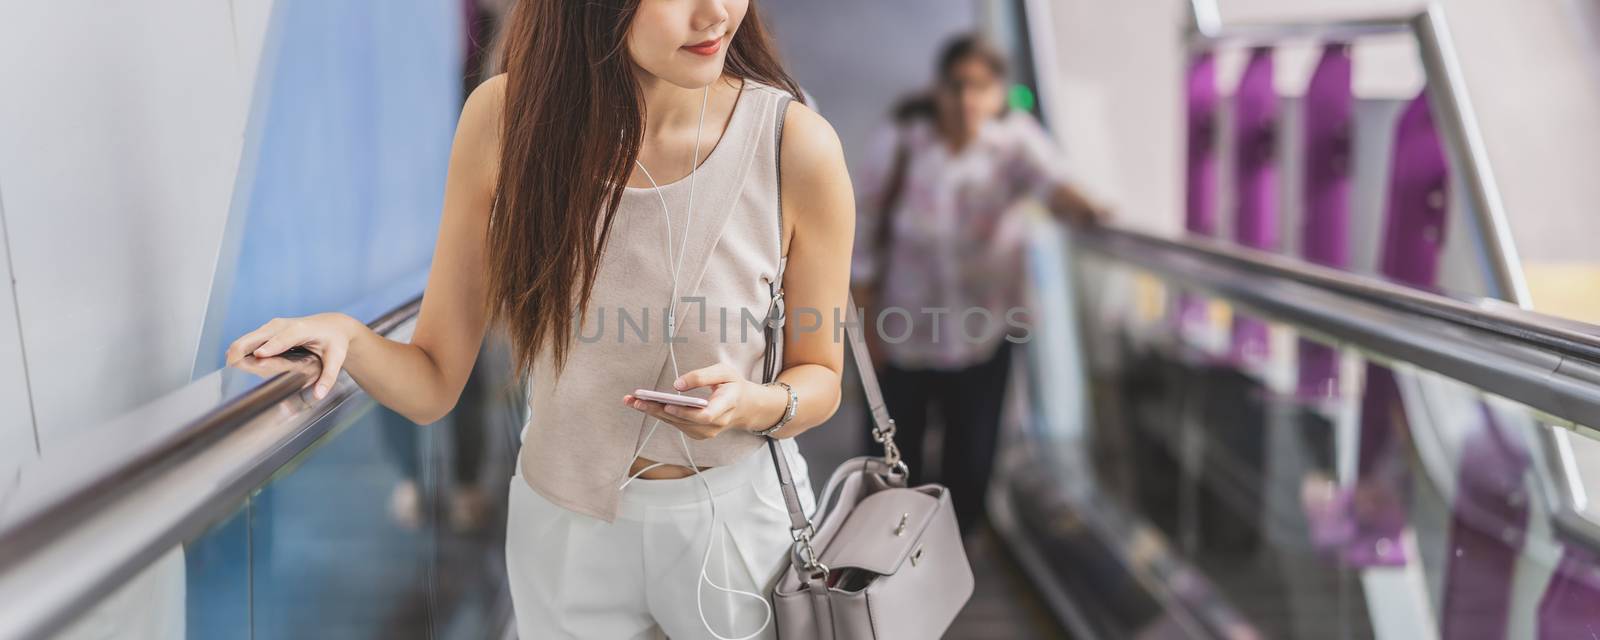 Banner, web page or cover template of Asian woman passenger usin by Tzido